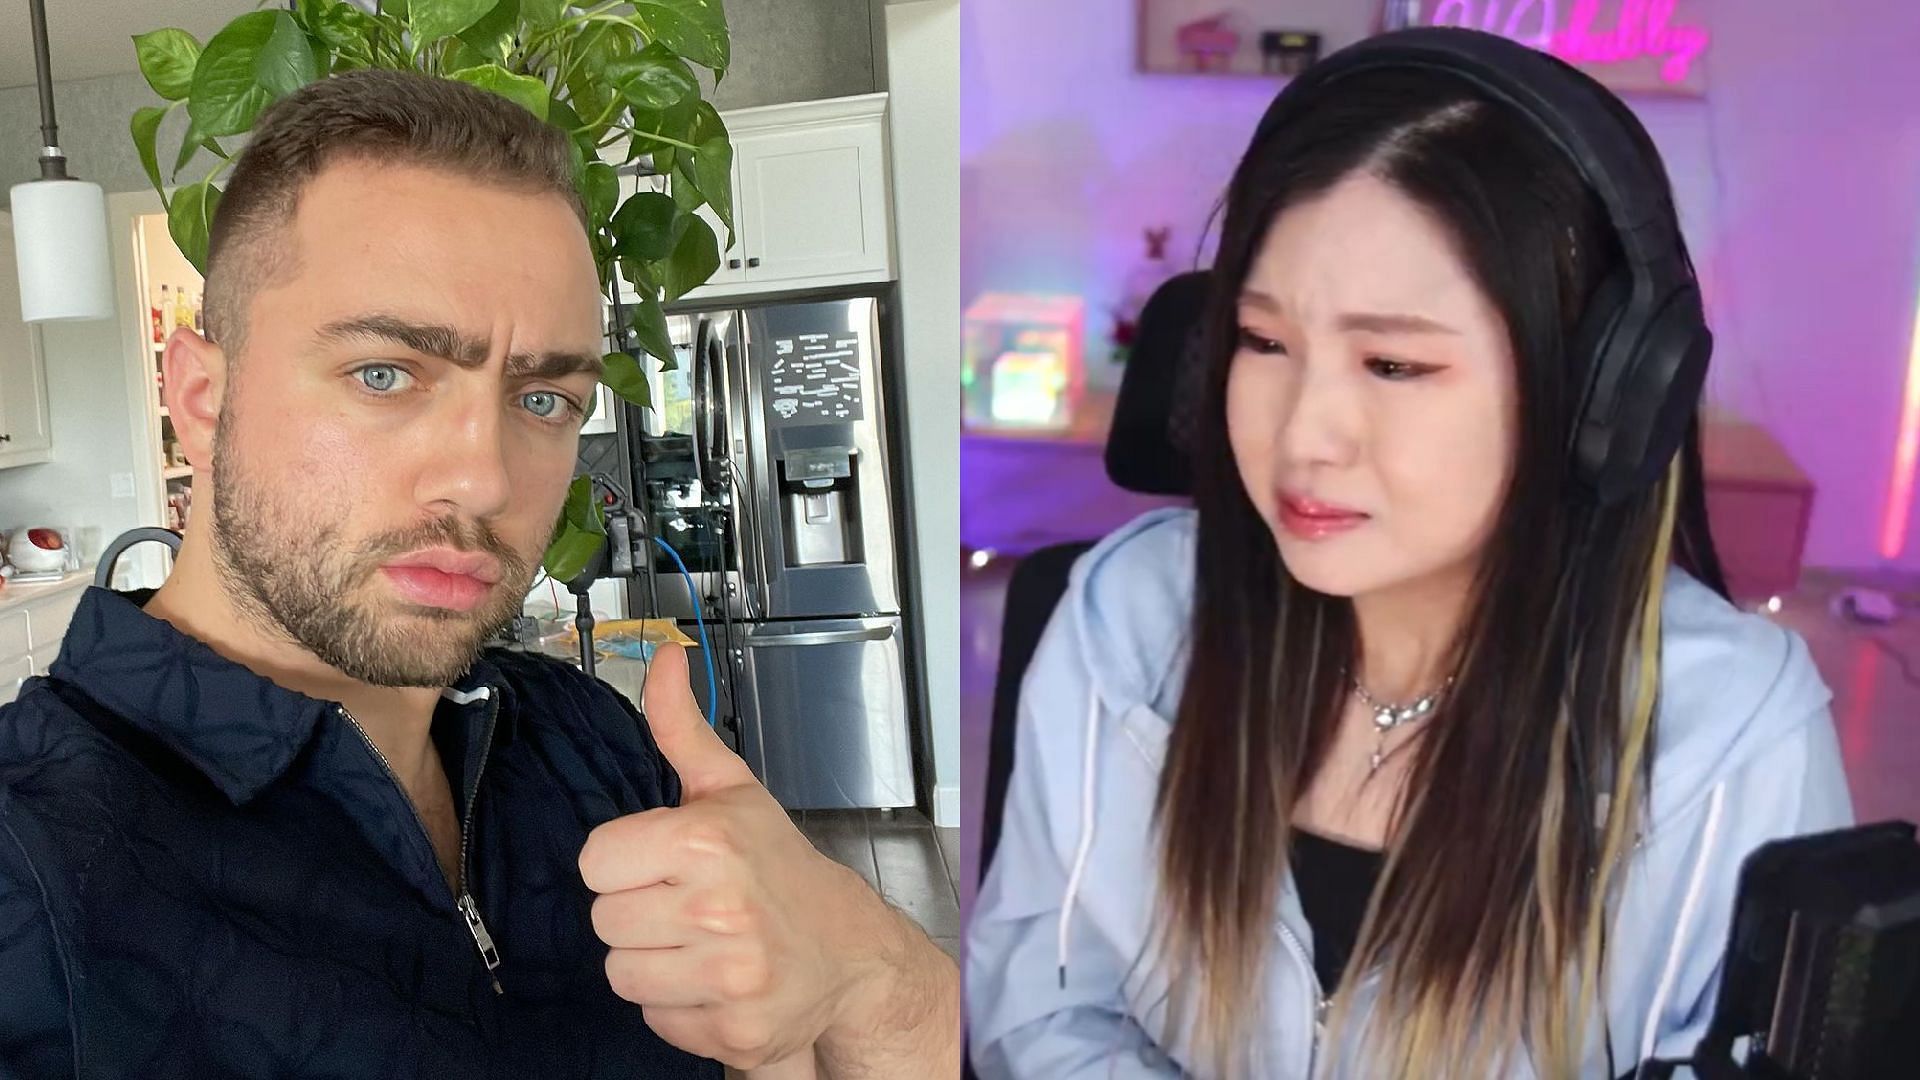 Mizkif offers help as Korean streamer HAchubby talks about the difficulties of moving from Twitch (Image via Mizkif/Instagram, HAchubby/Twitch)